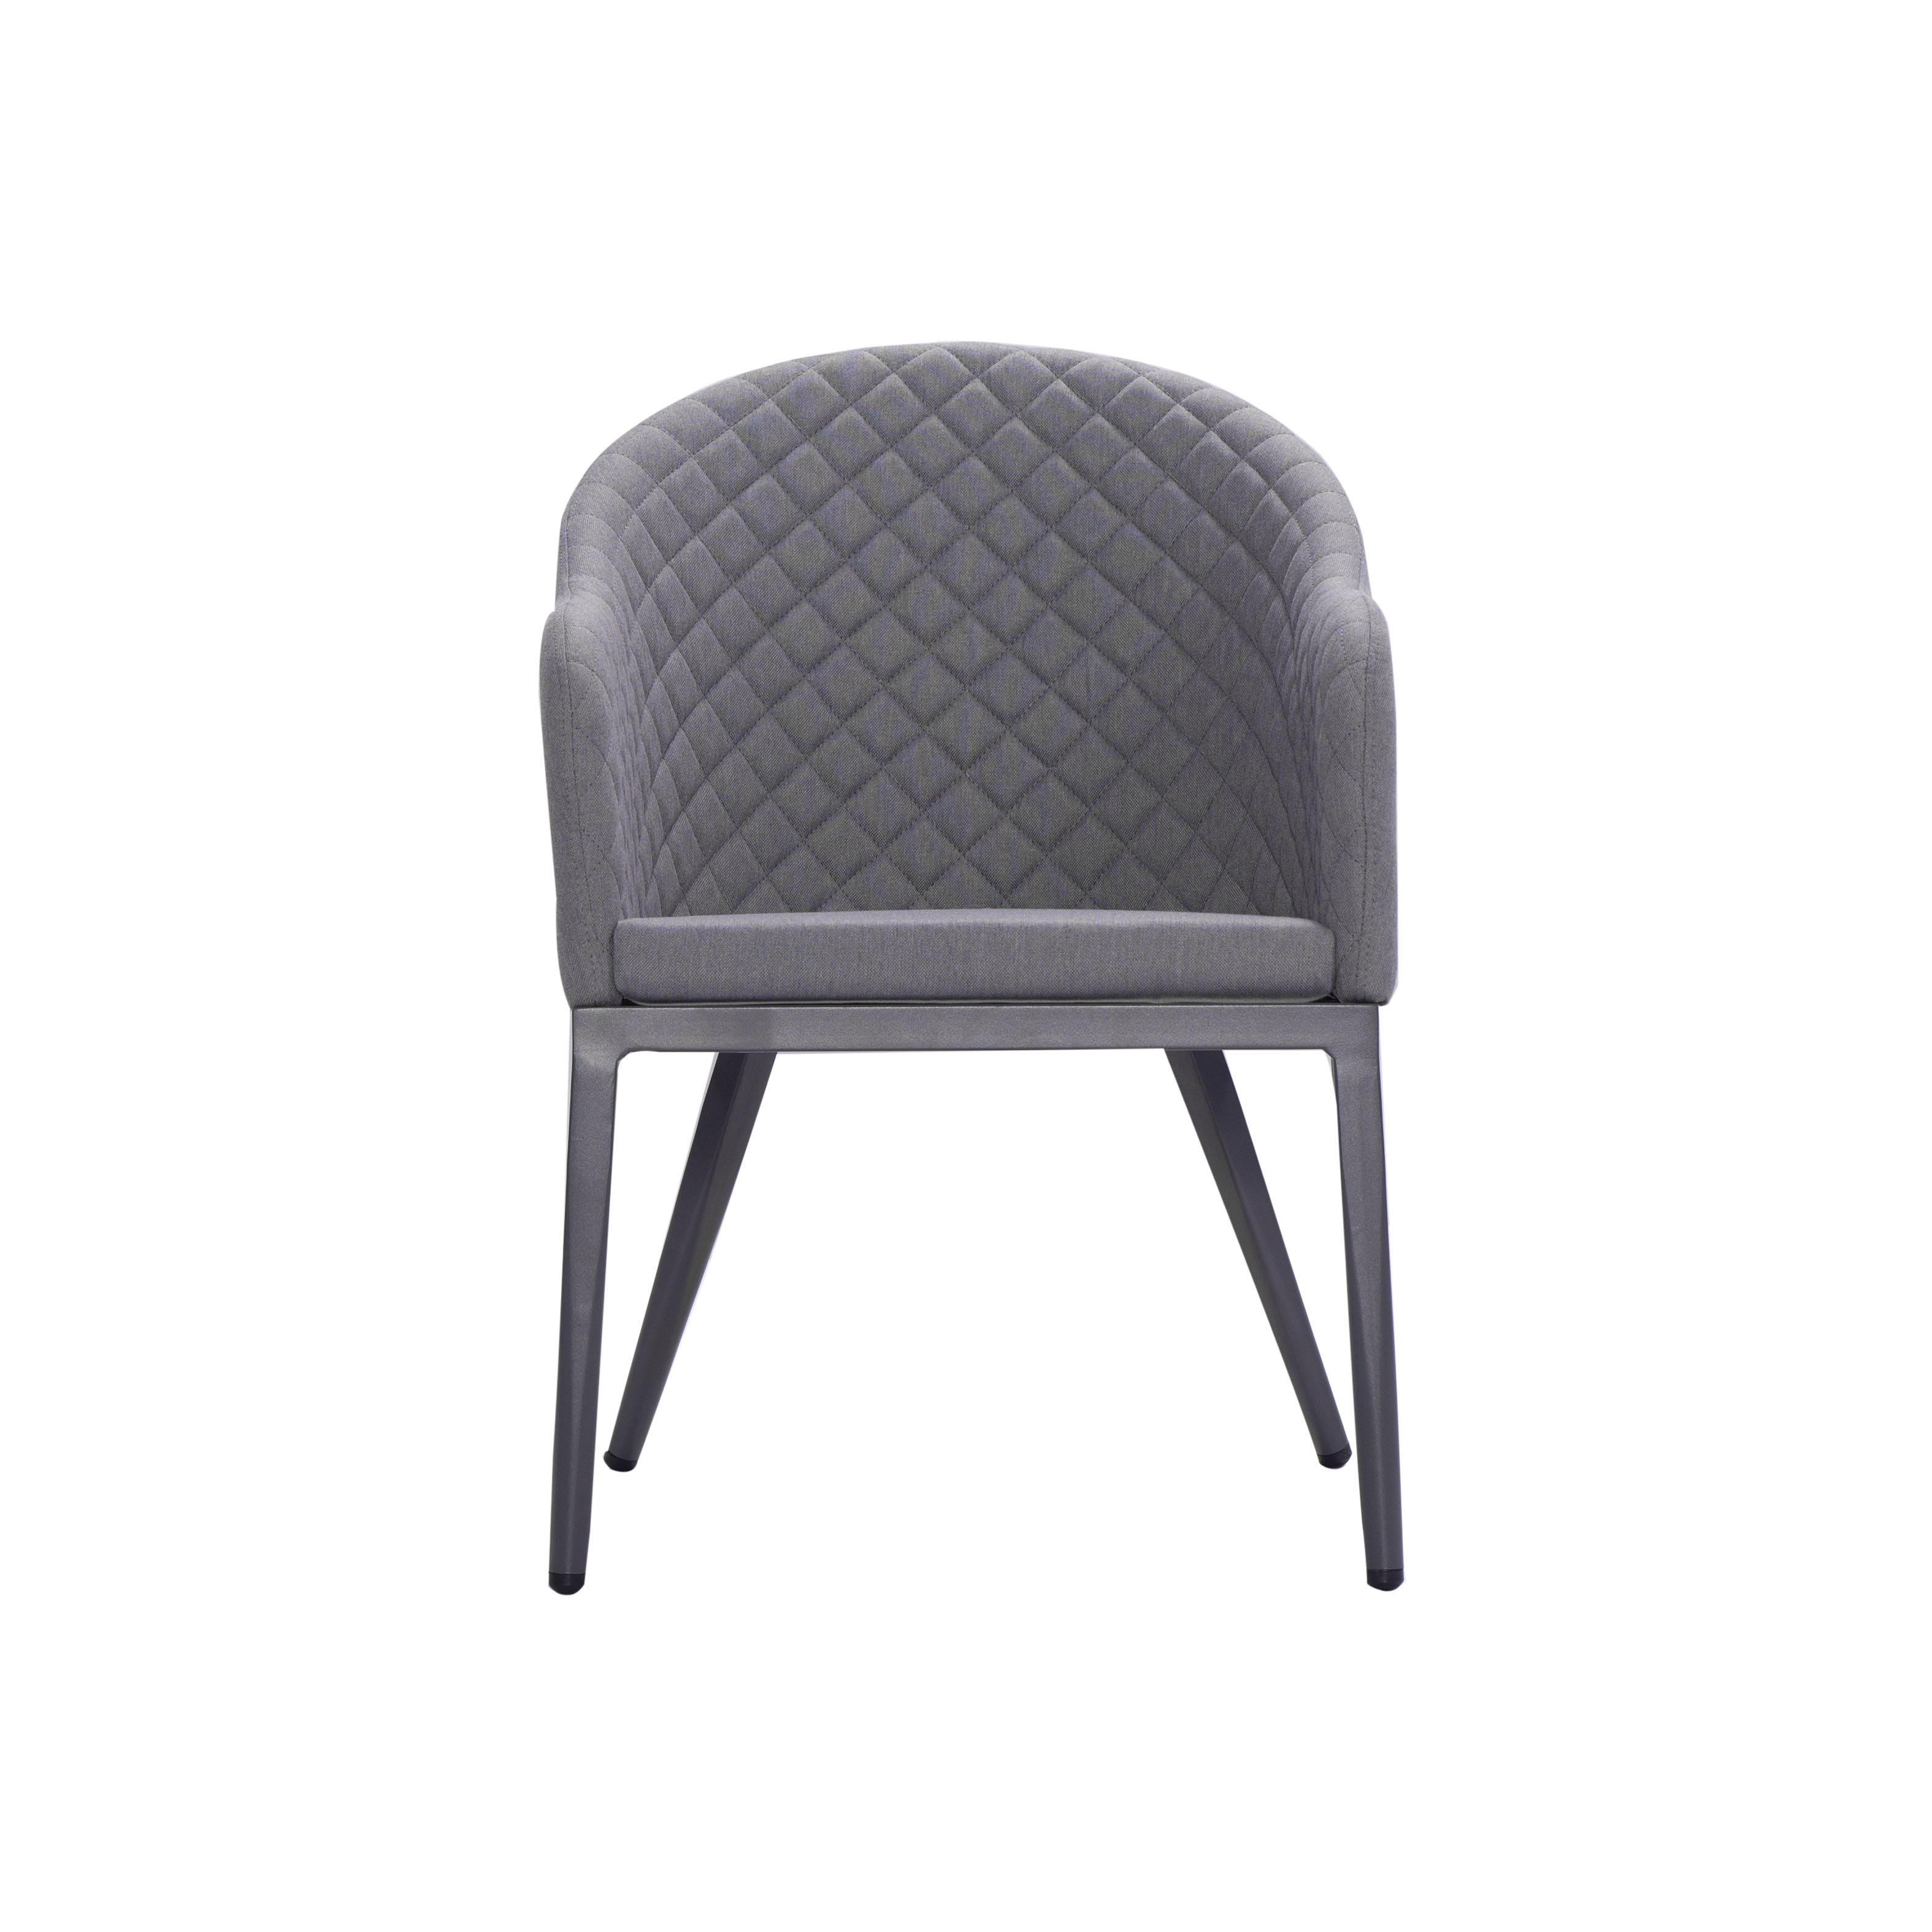 Legend dining chair S3